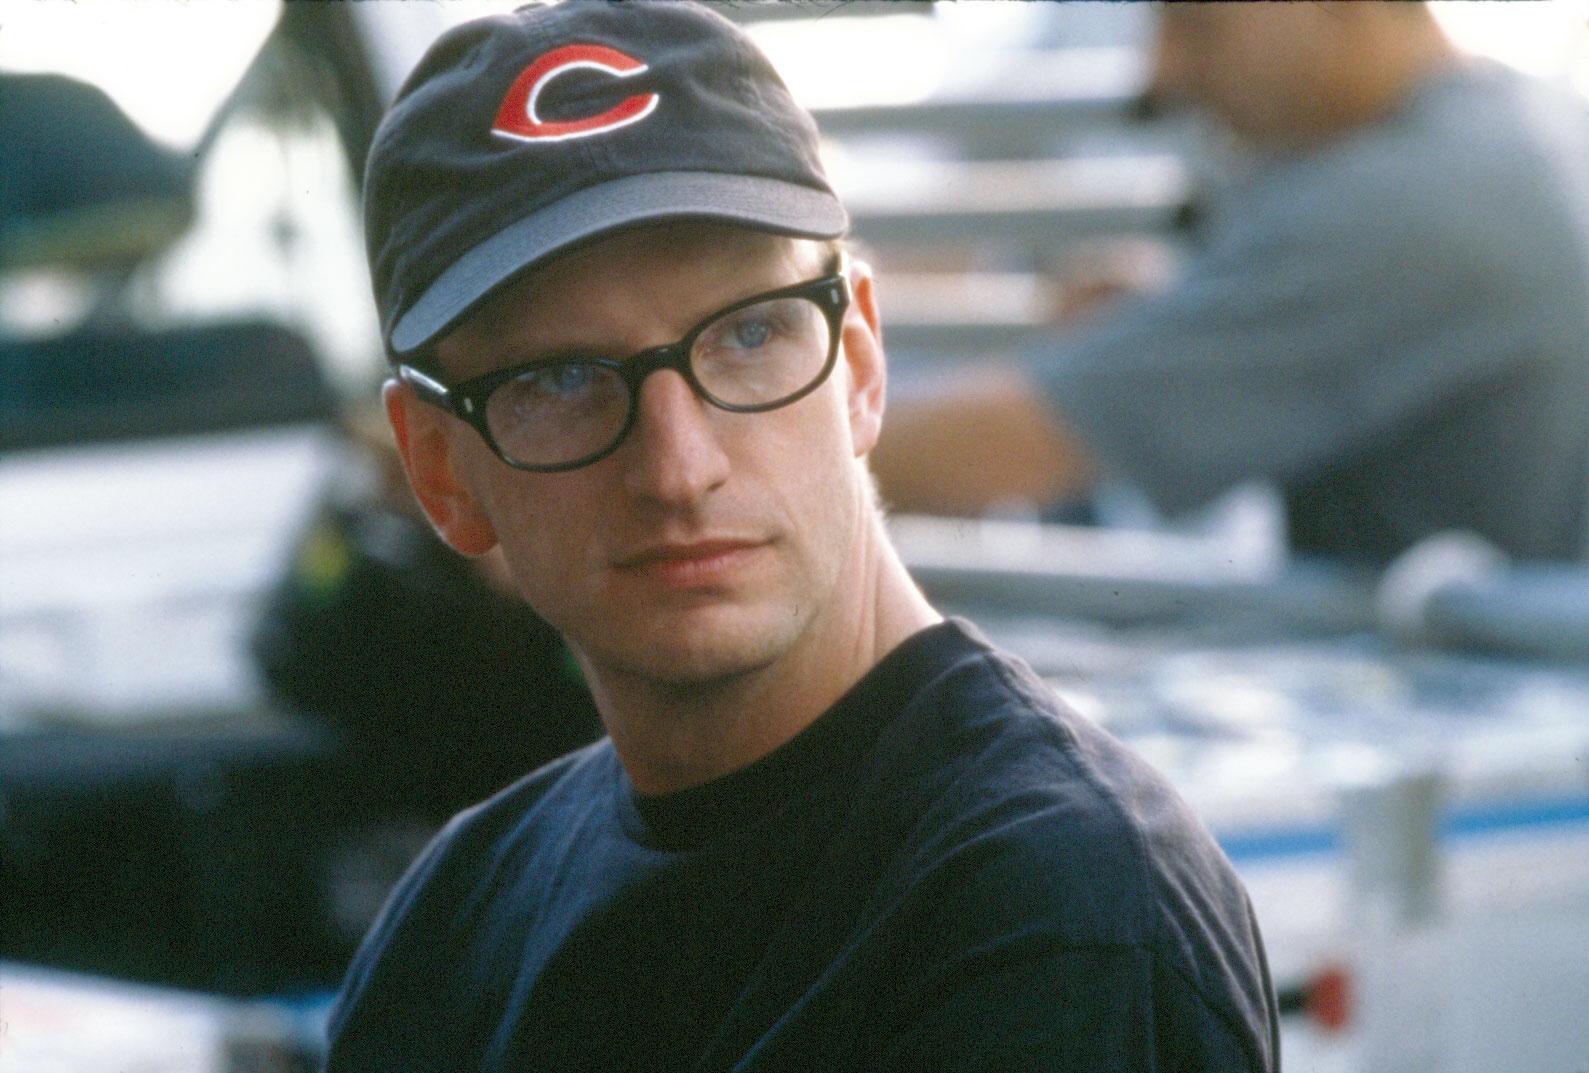 Happy birthday to the great Steven Soderbergh 